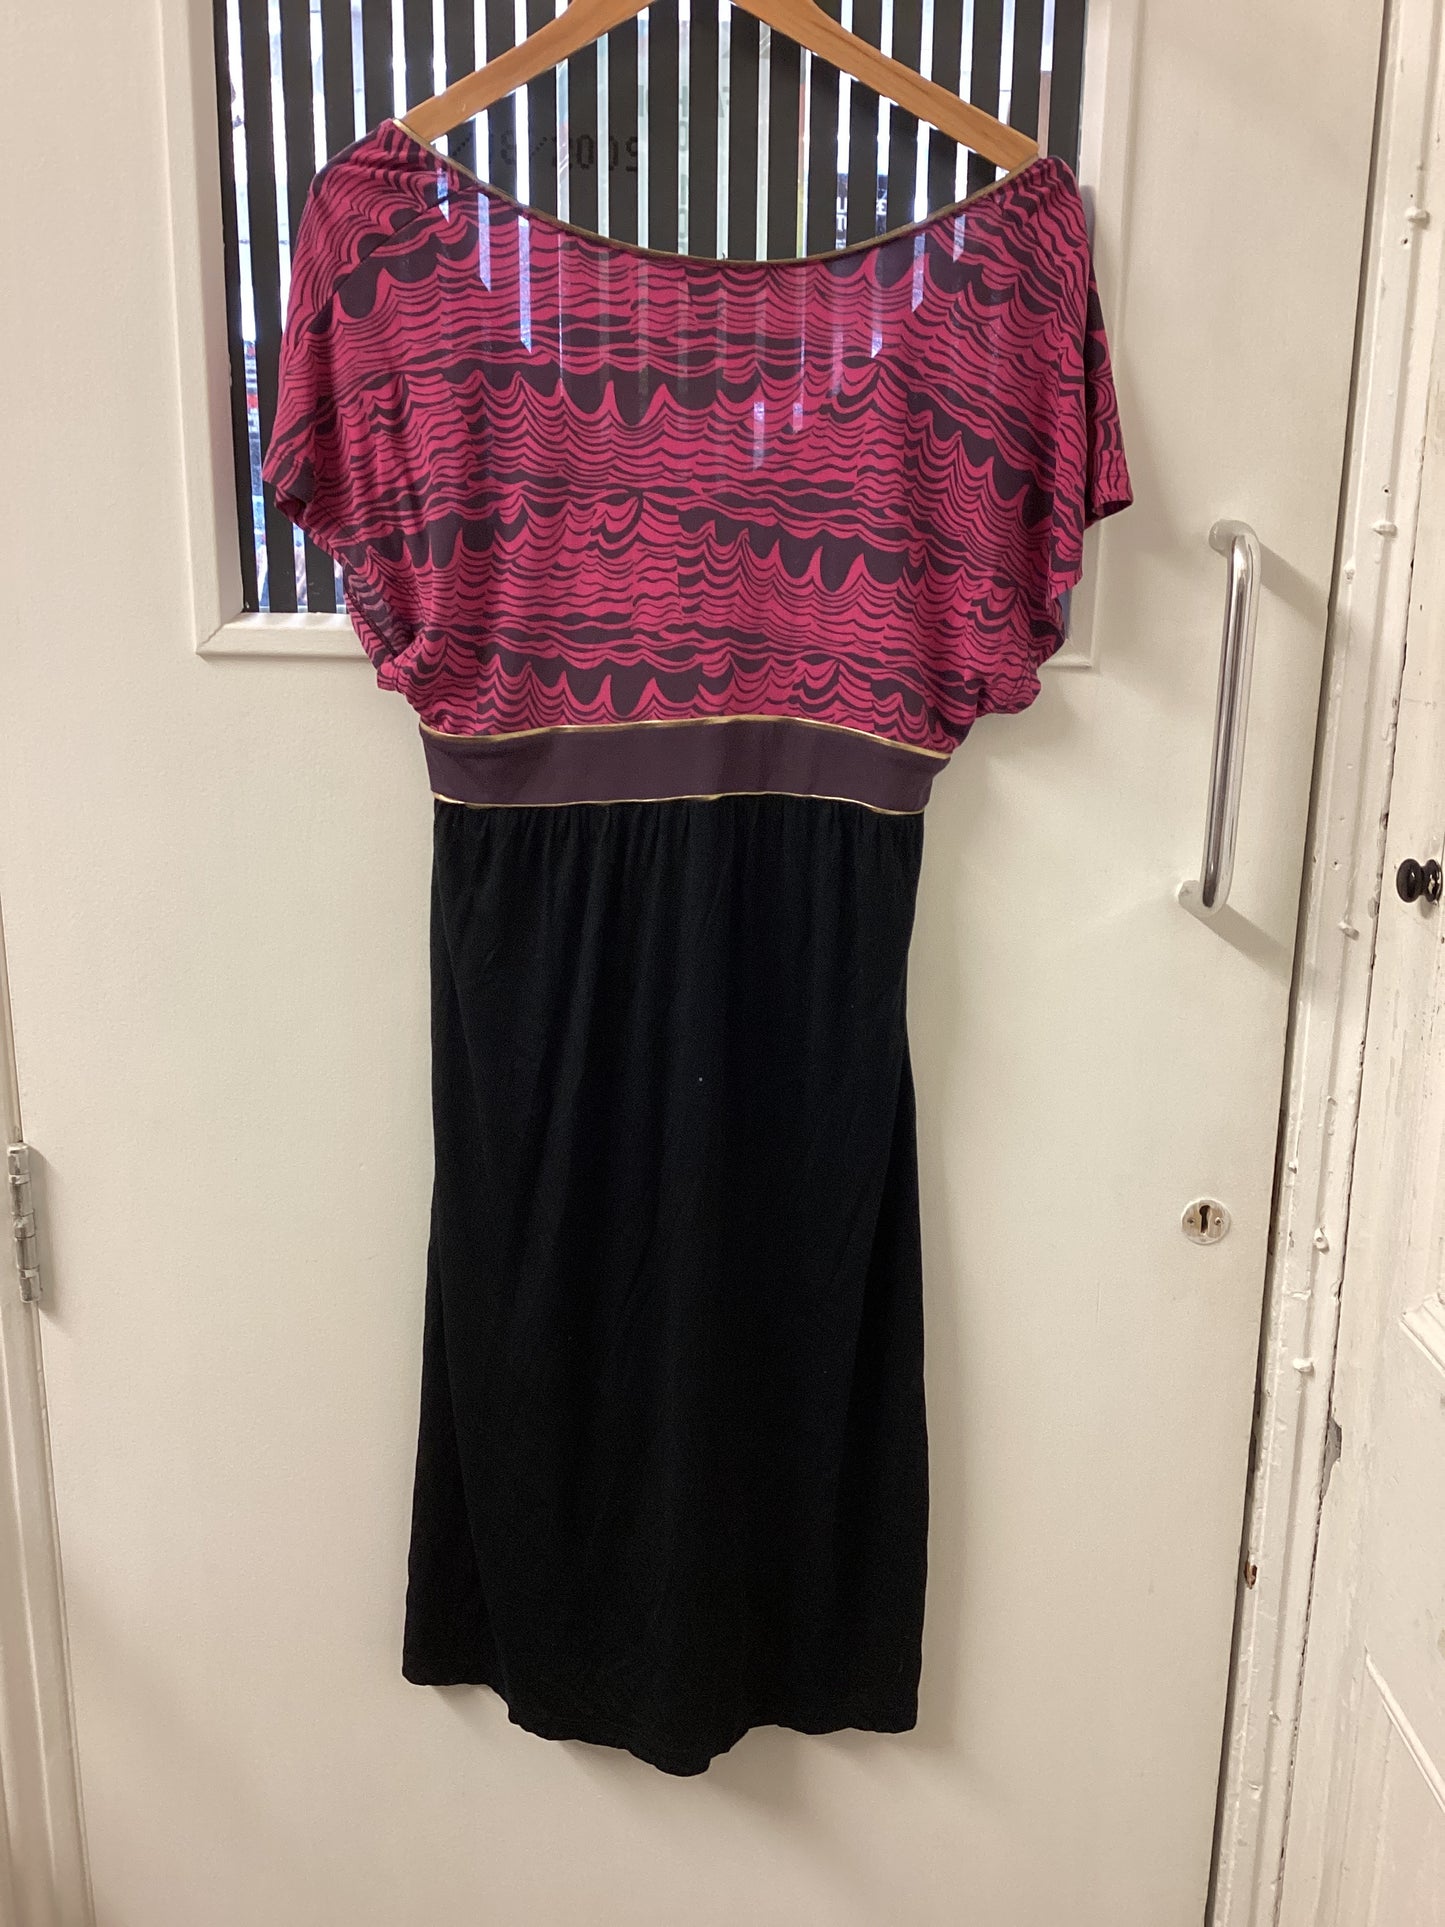 French Connection Pink and Black Dress Size 10